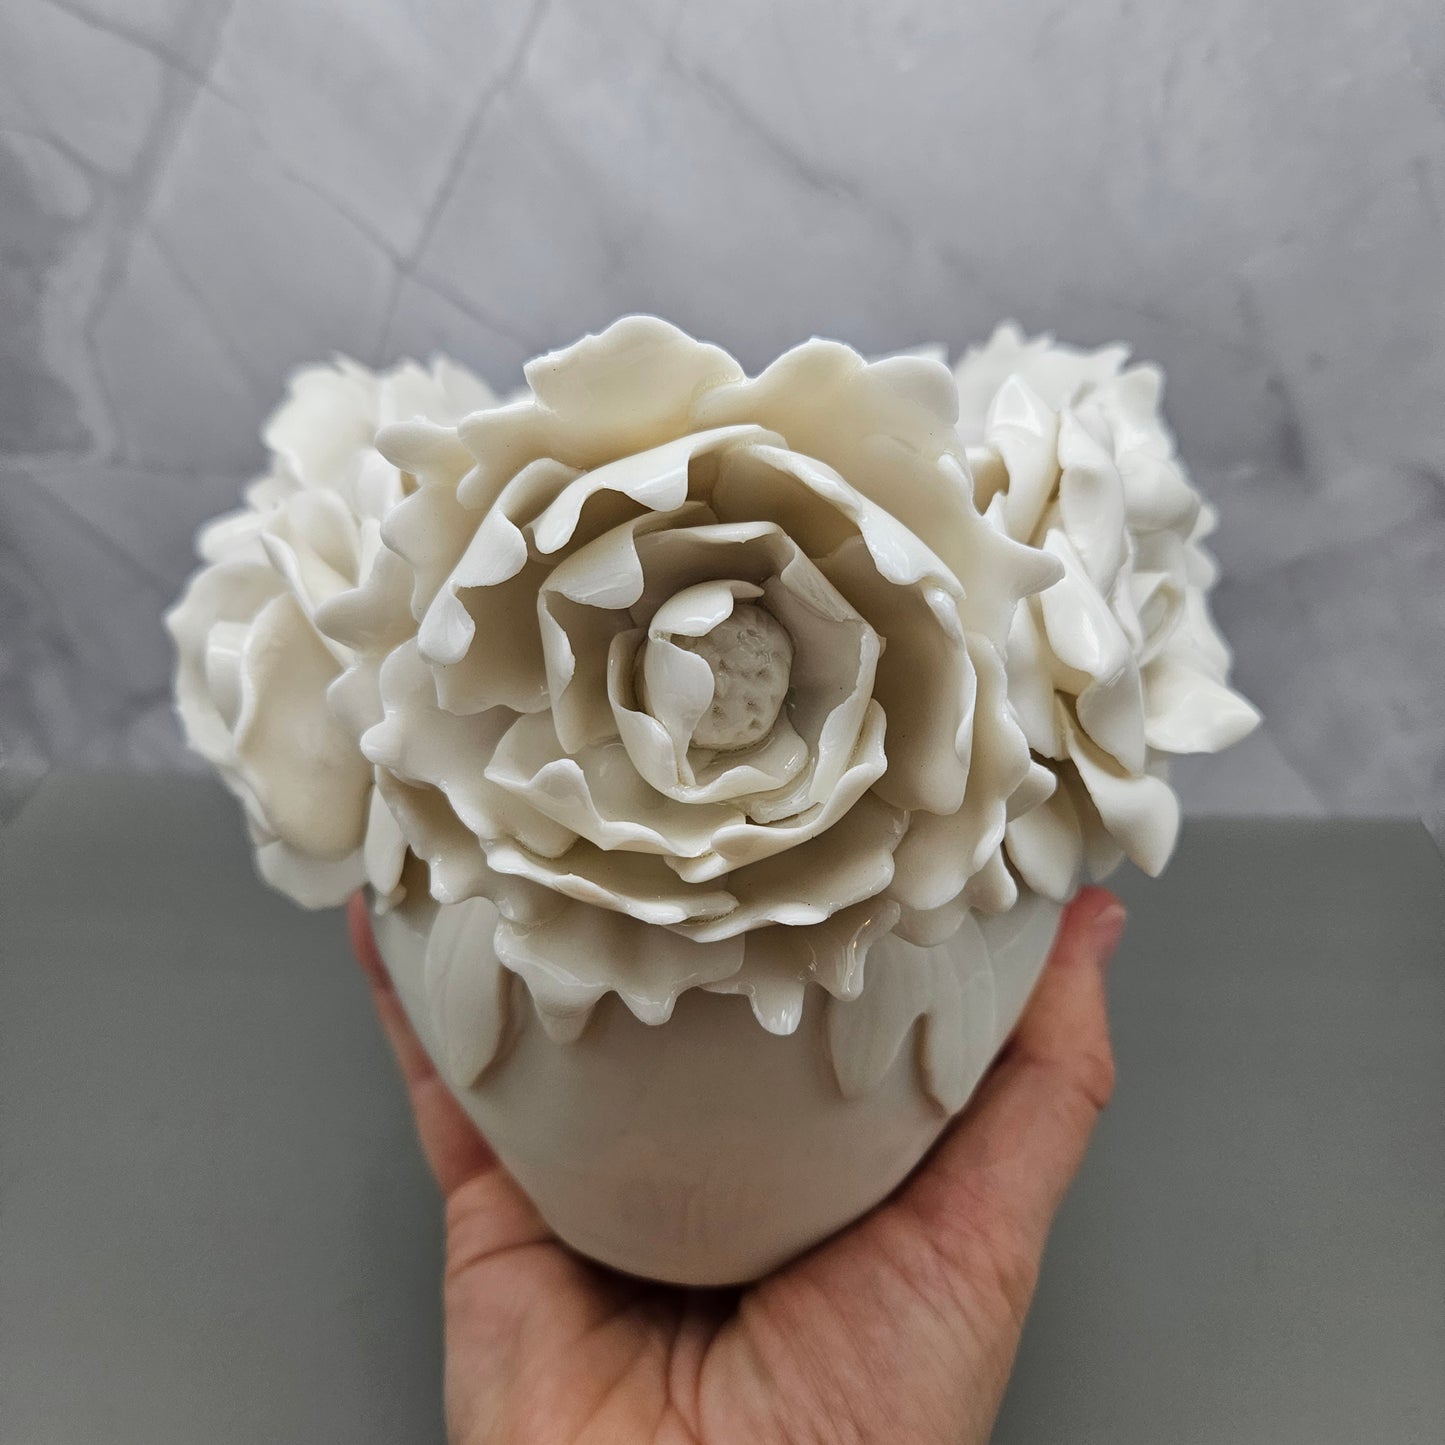 White frost vase with handmade flowers, standing 5 inches tall